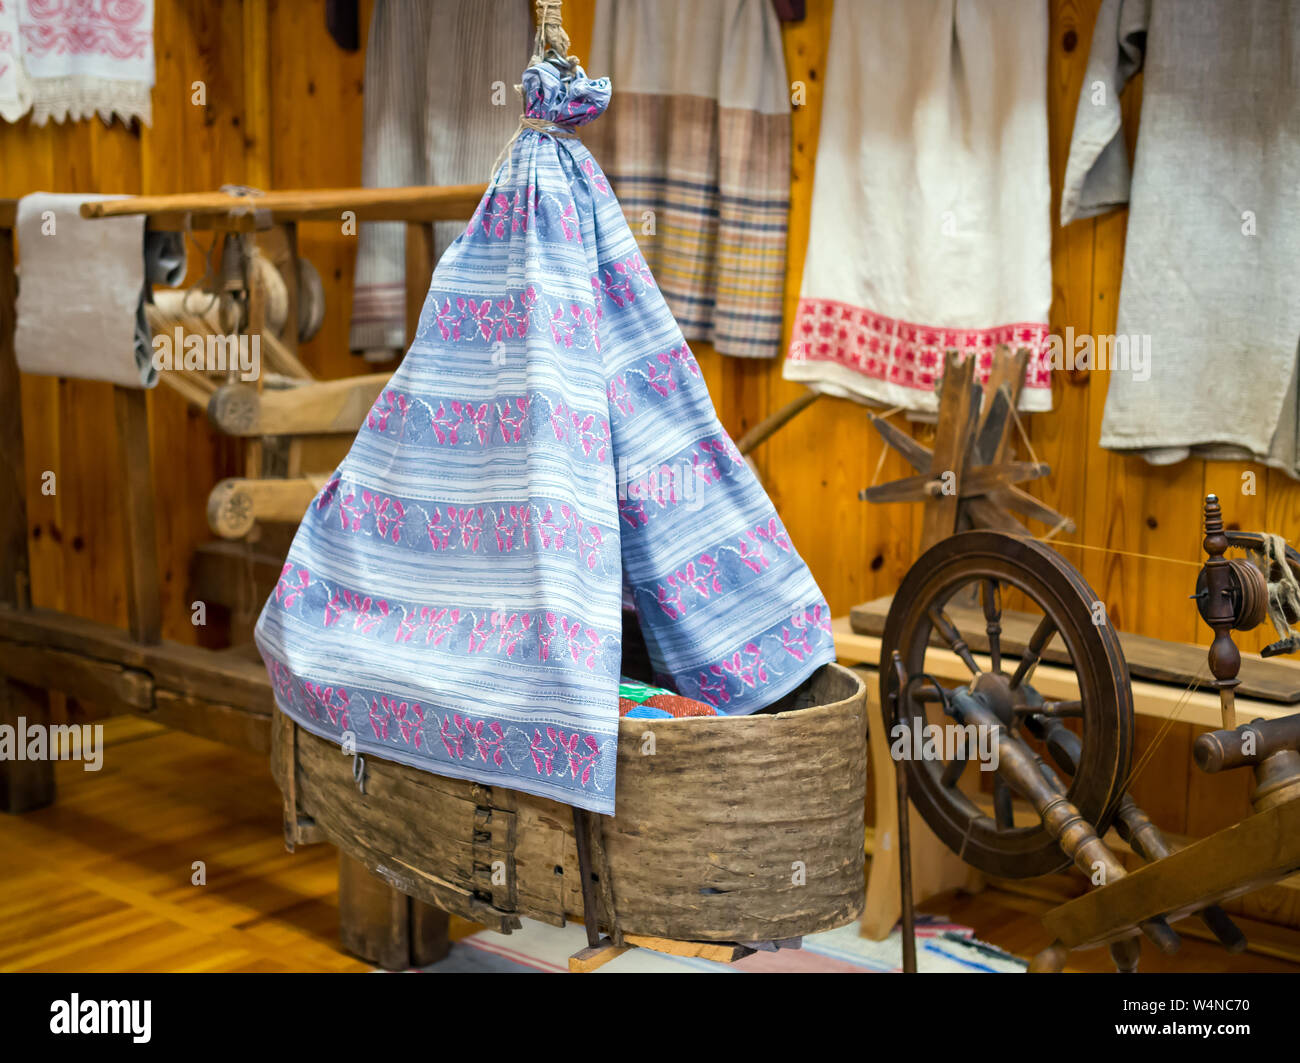 Antique wicker baby cradle in the interior of the hut Stock Photo